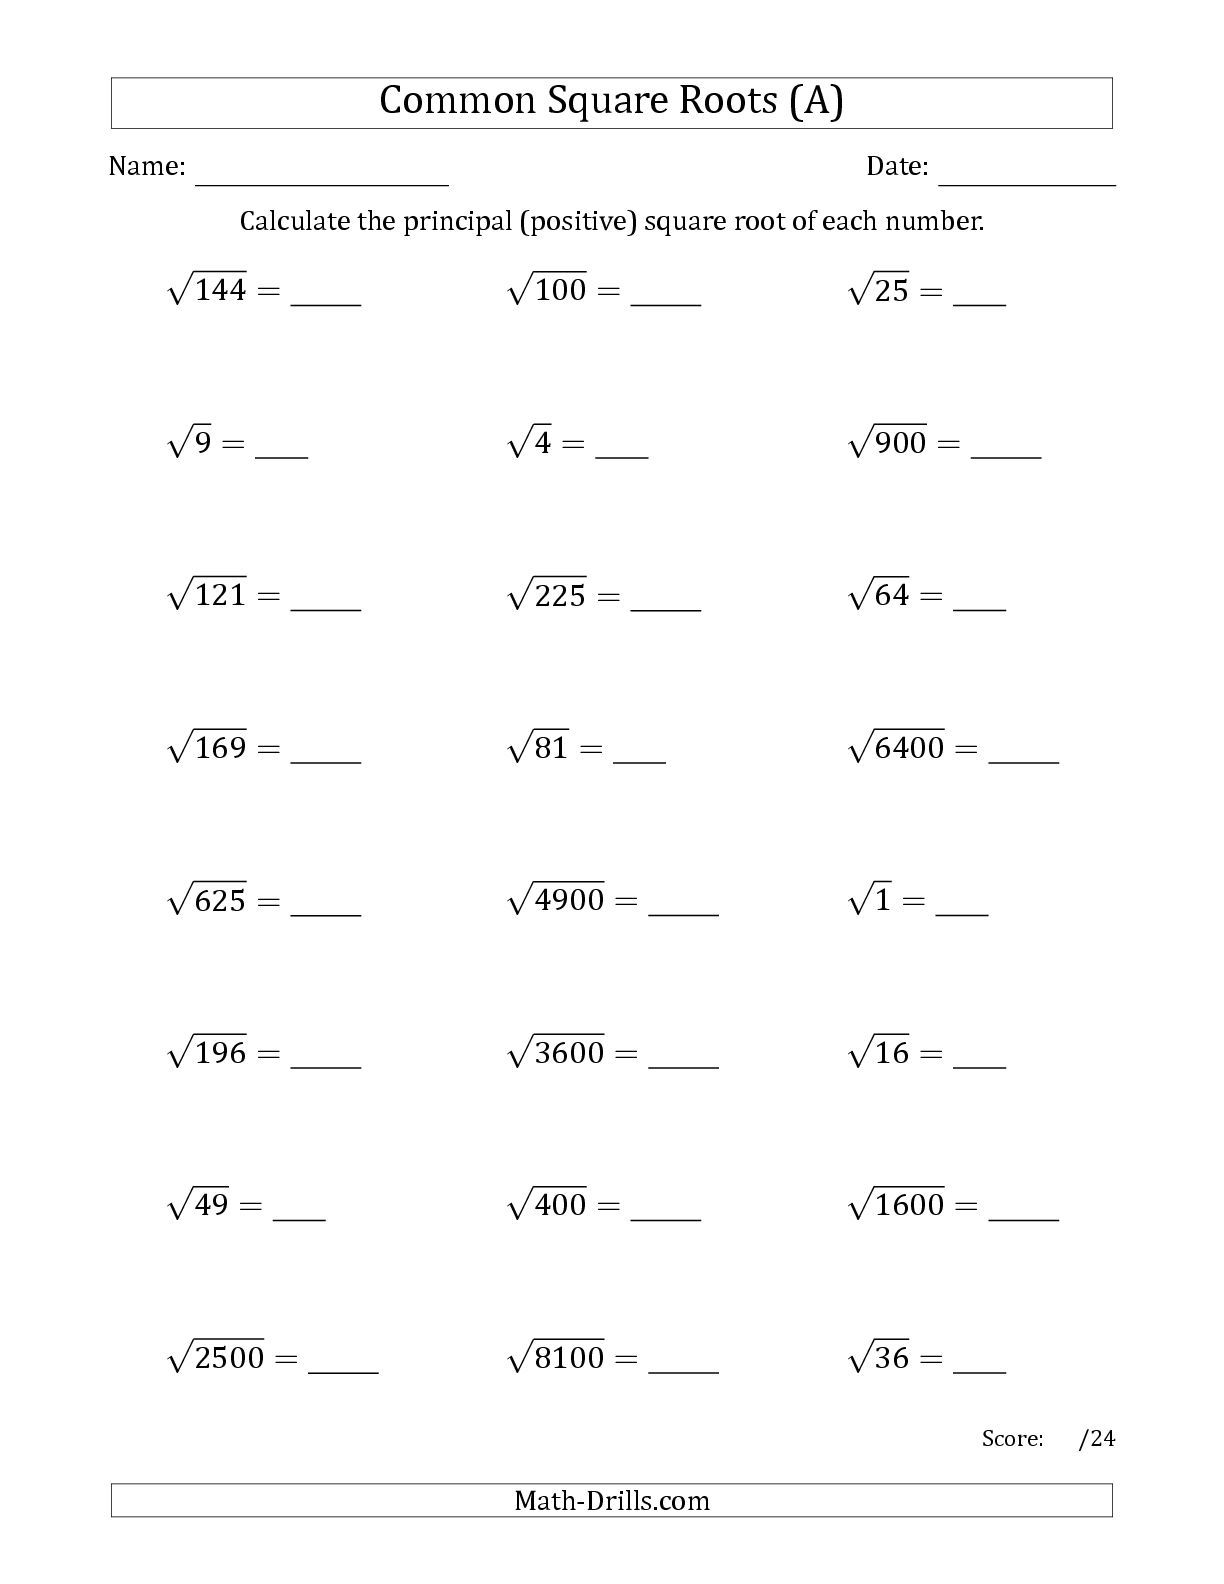 The Principal Square Roots Common A Number Sense Worksheet Square Roots Estimating Square Roots 8th Grade Math Worksheets